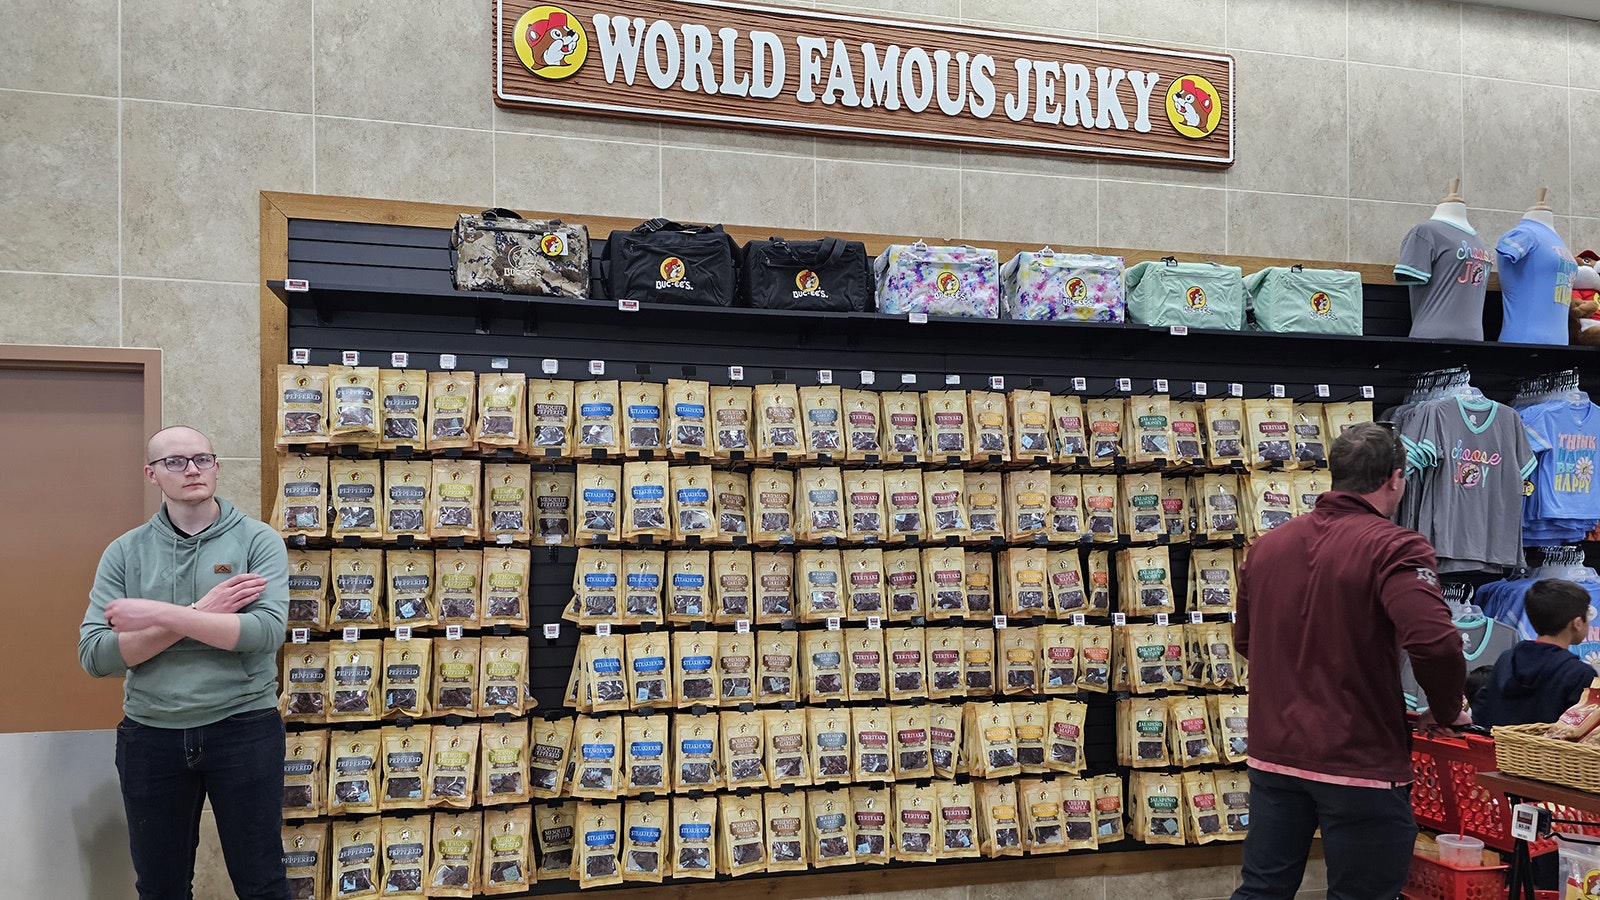 Buc-ee's prides itself on the "world famous jersey."